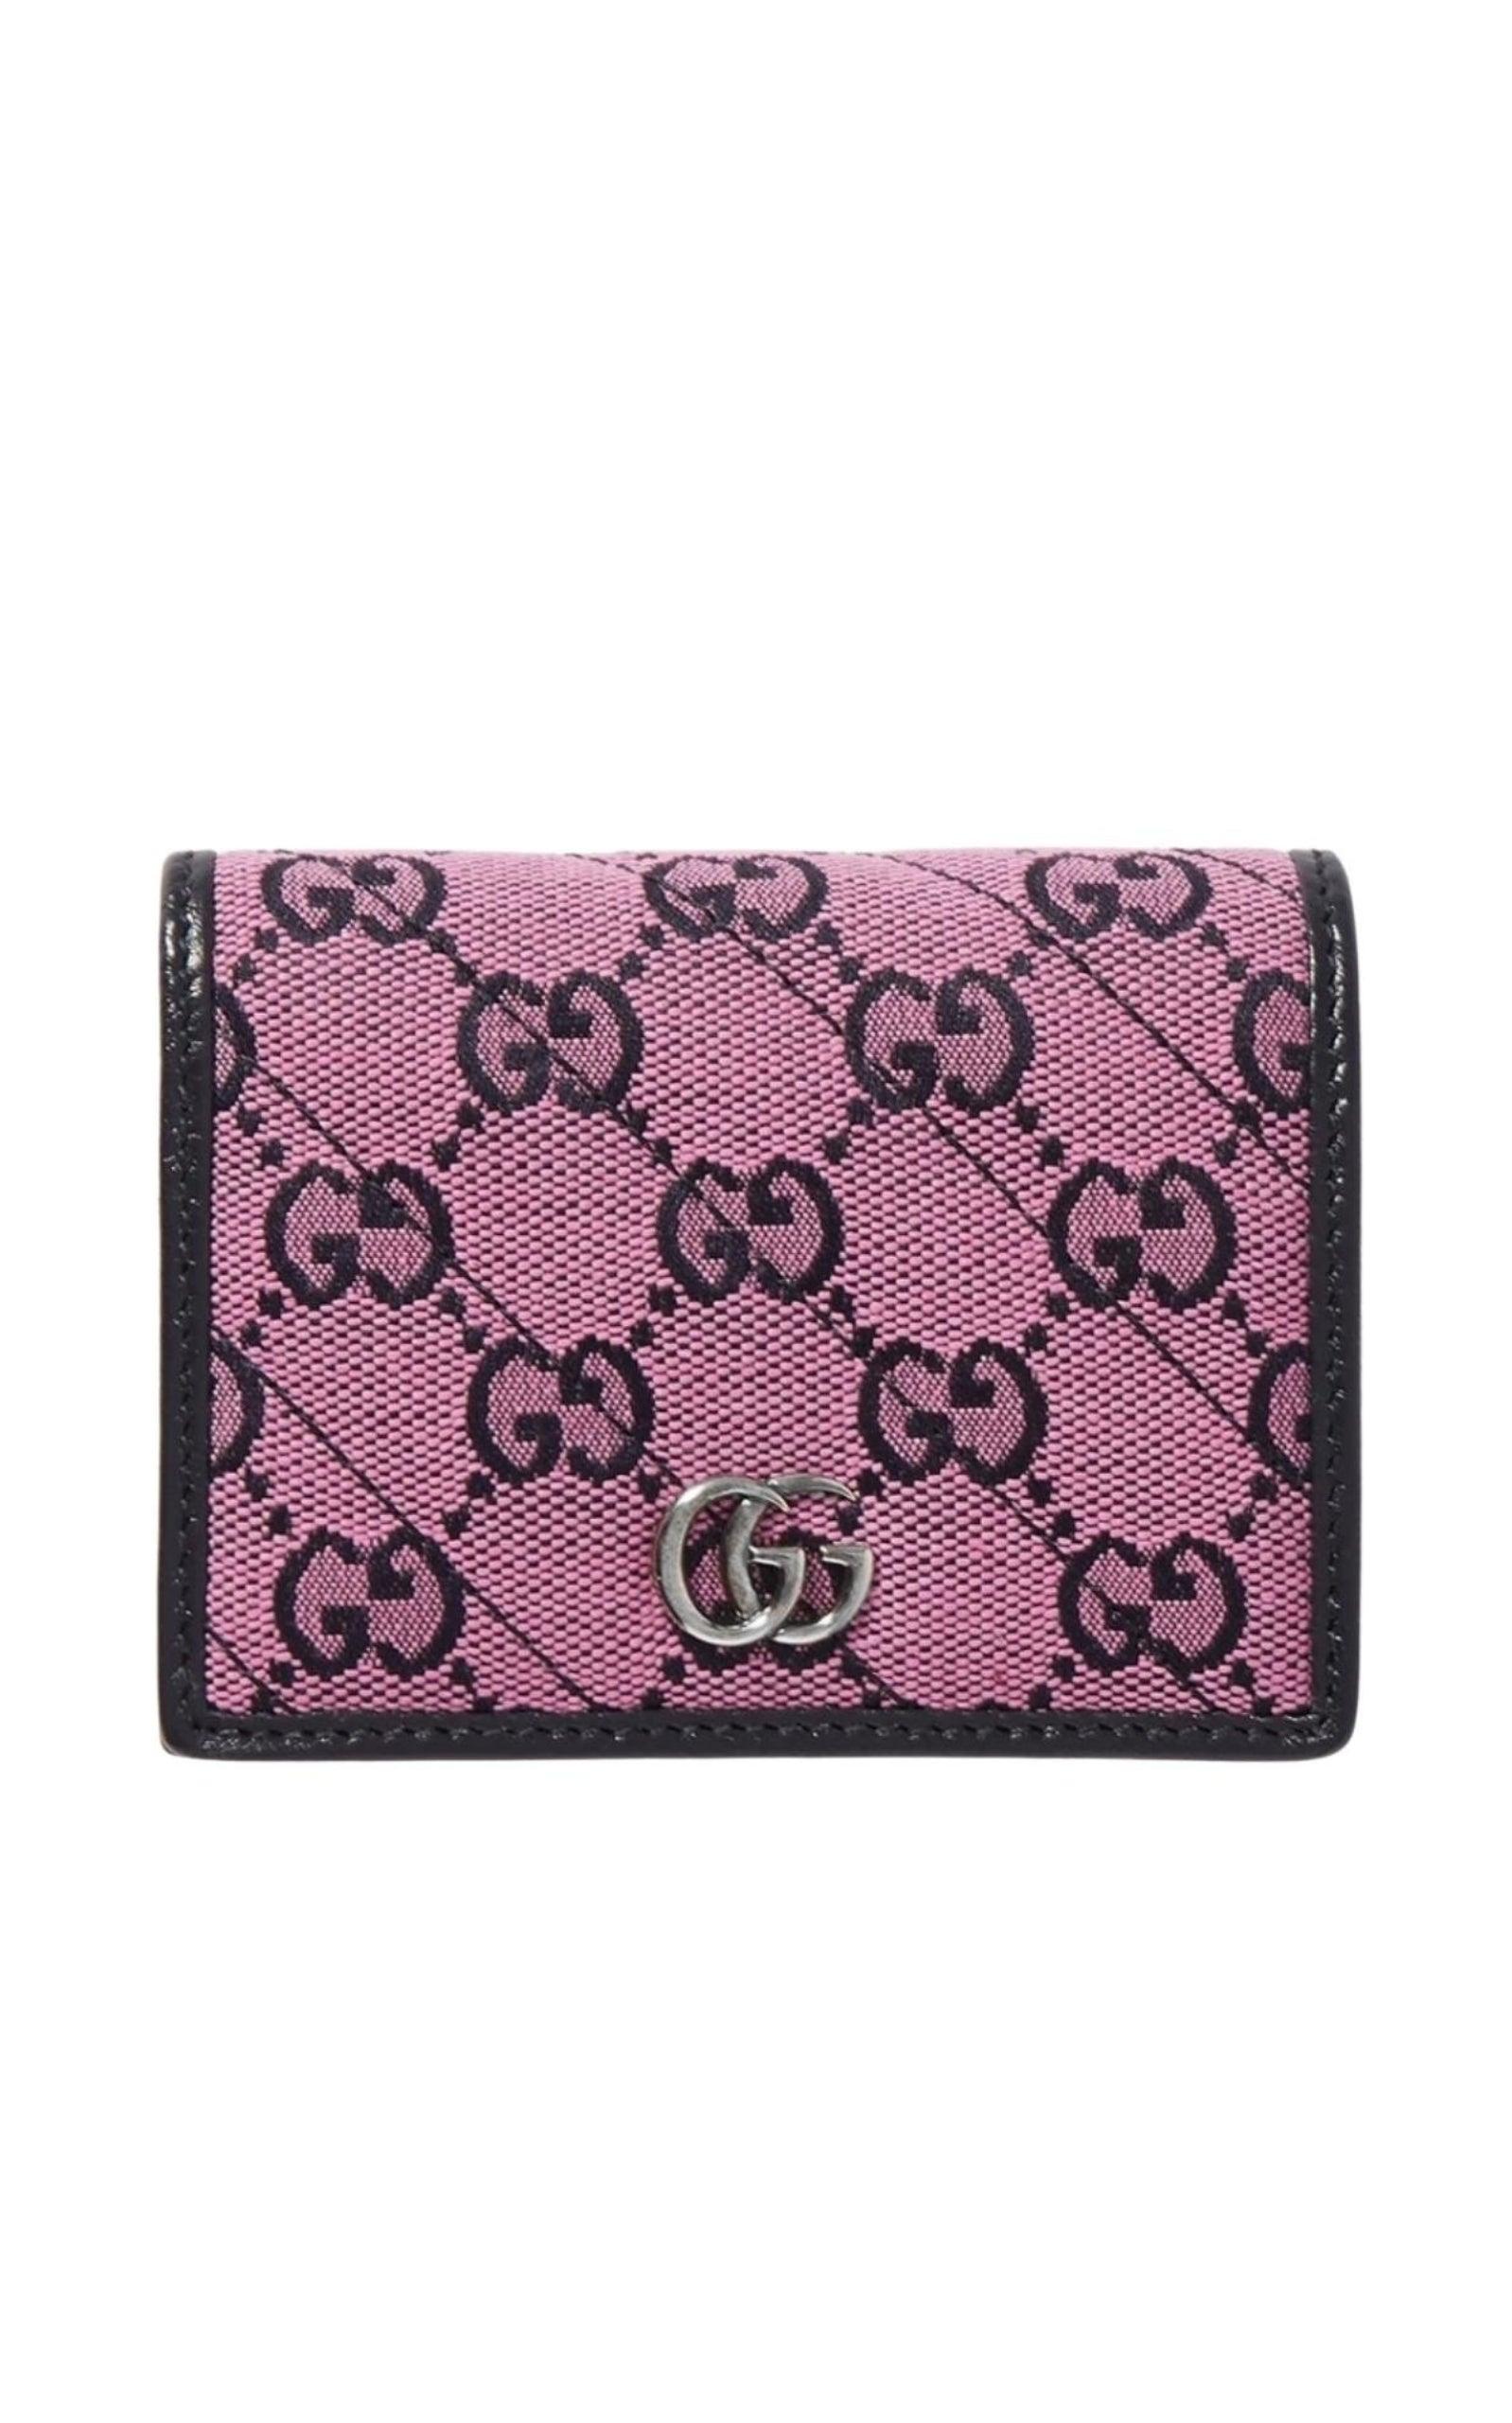 GG Marmont chain wallet in black leather and GG Supreme